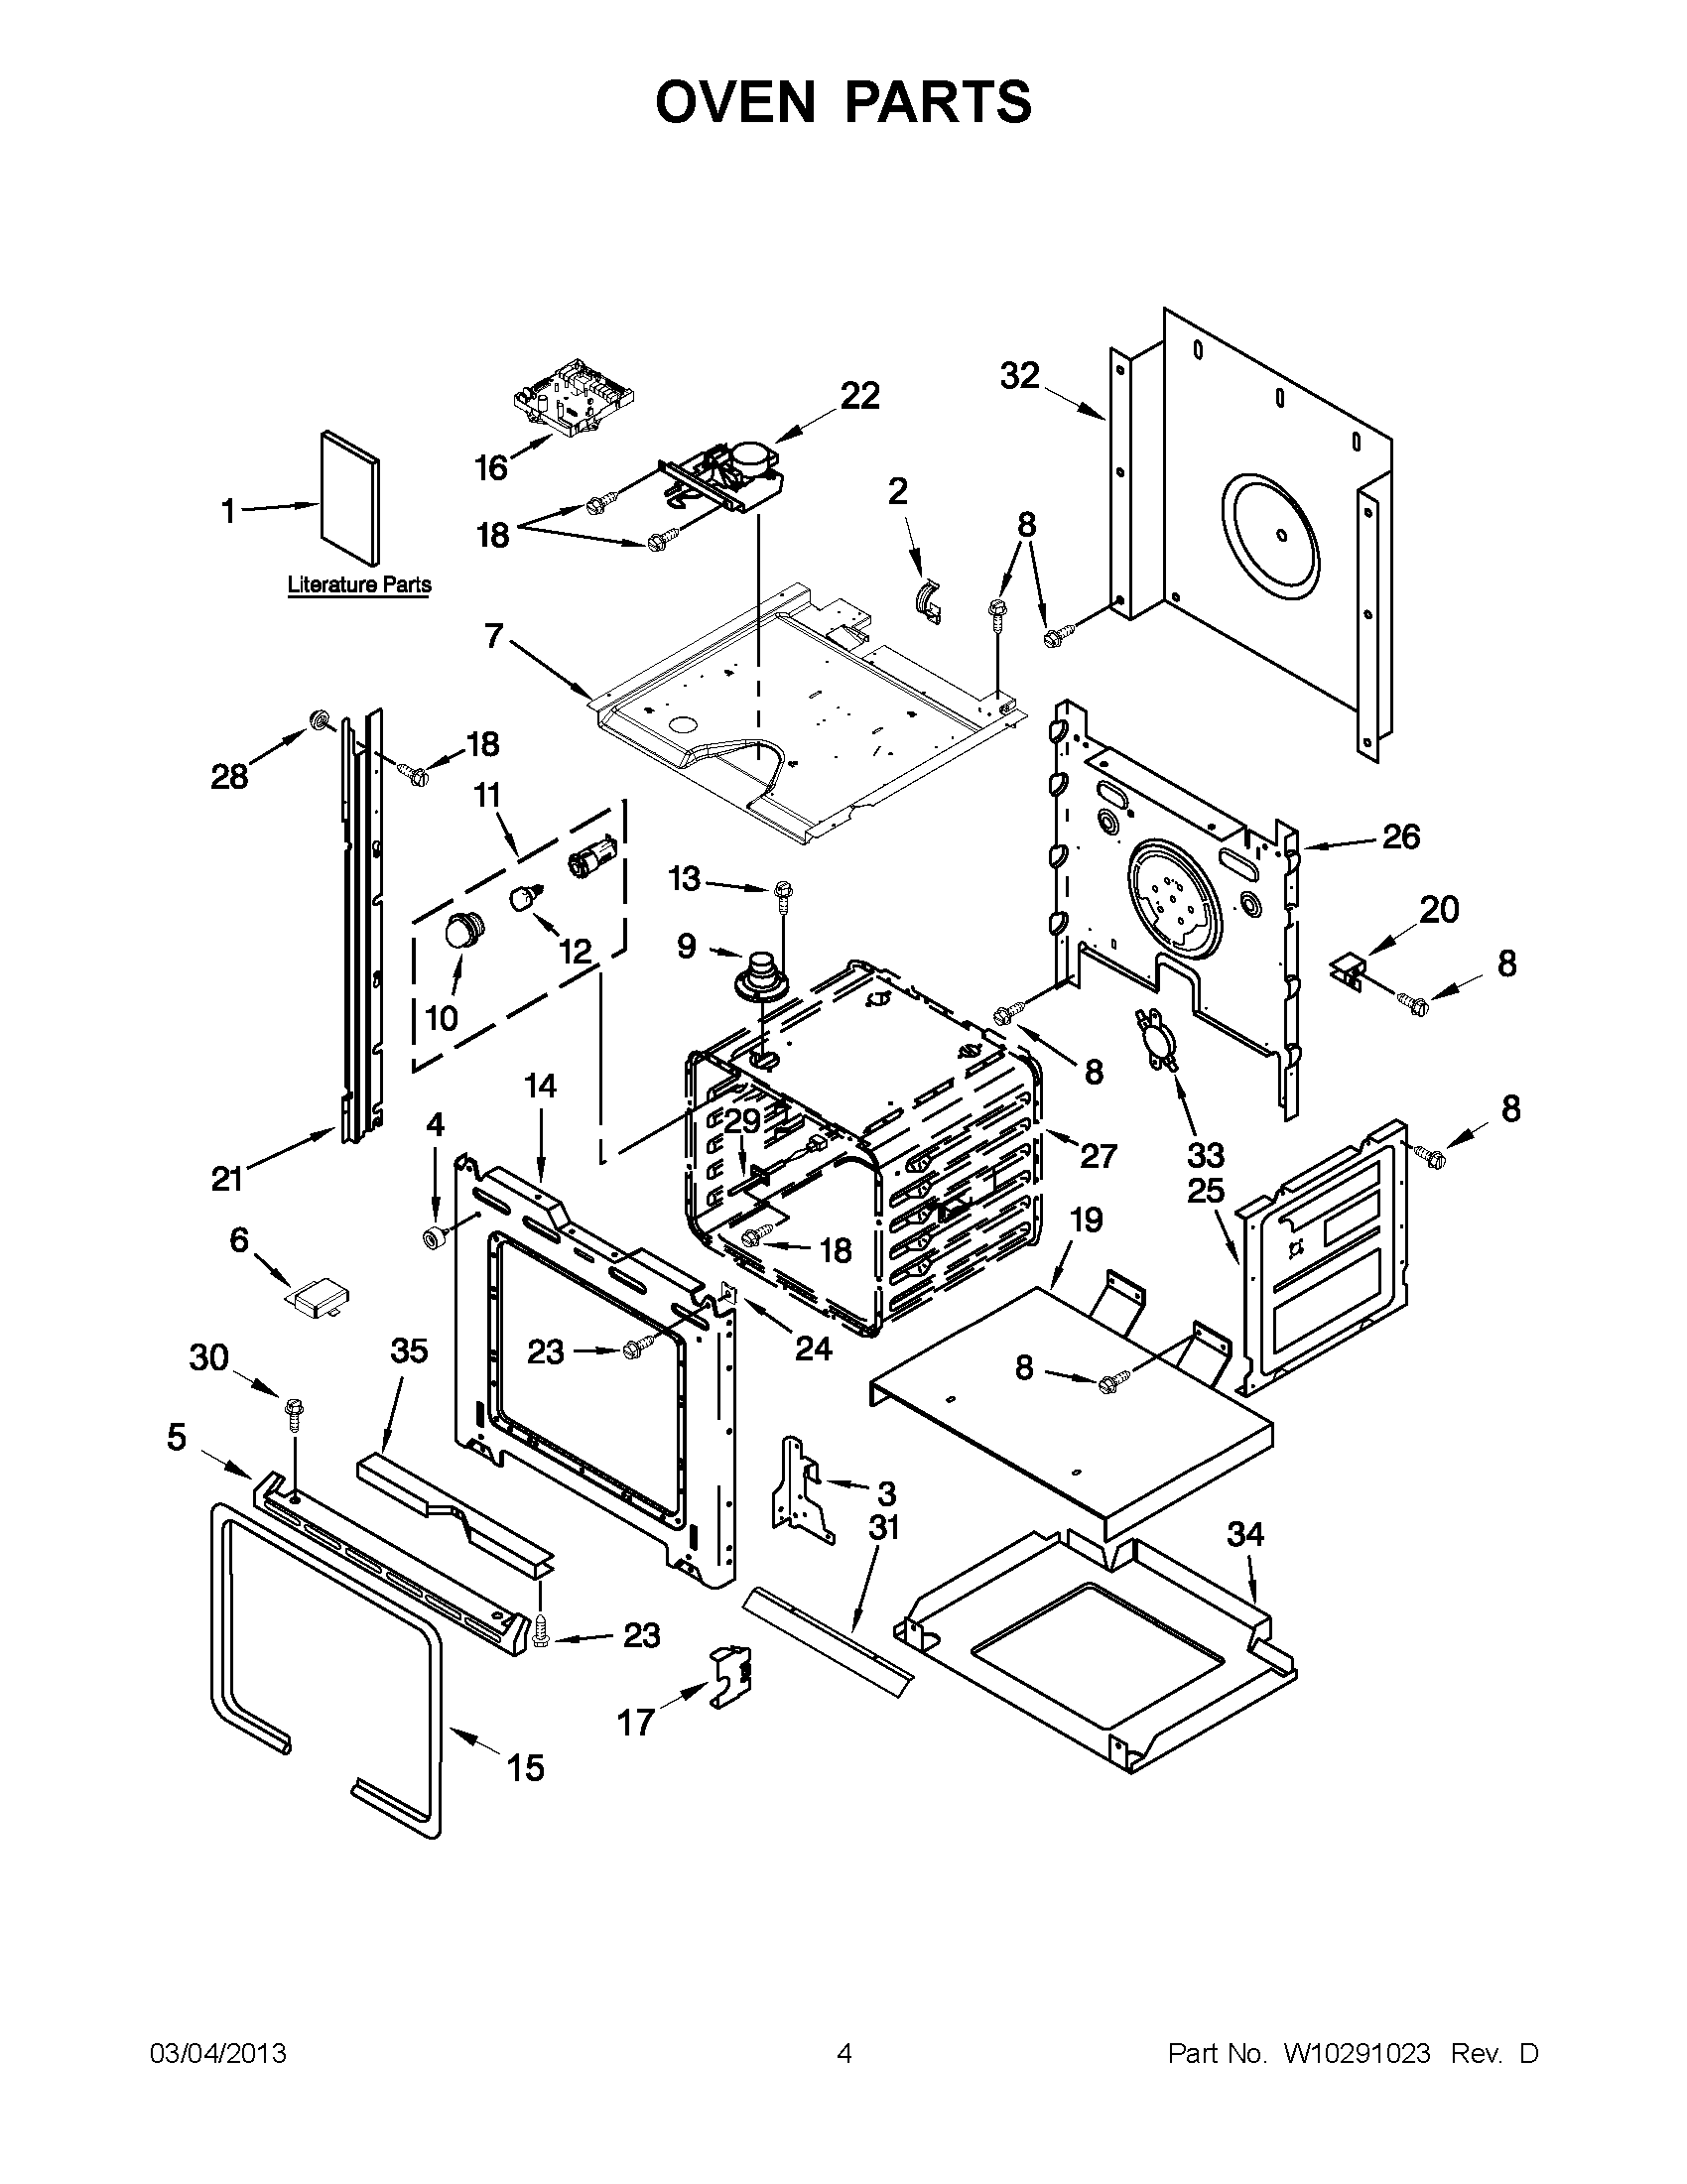 02 - OVEN PARTS